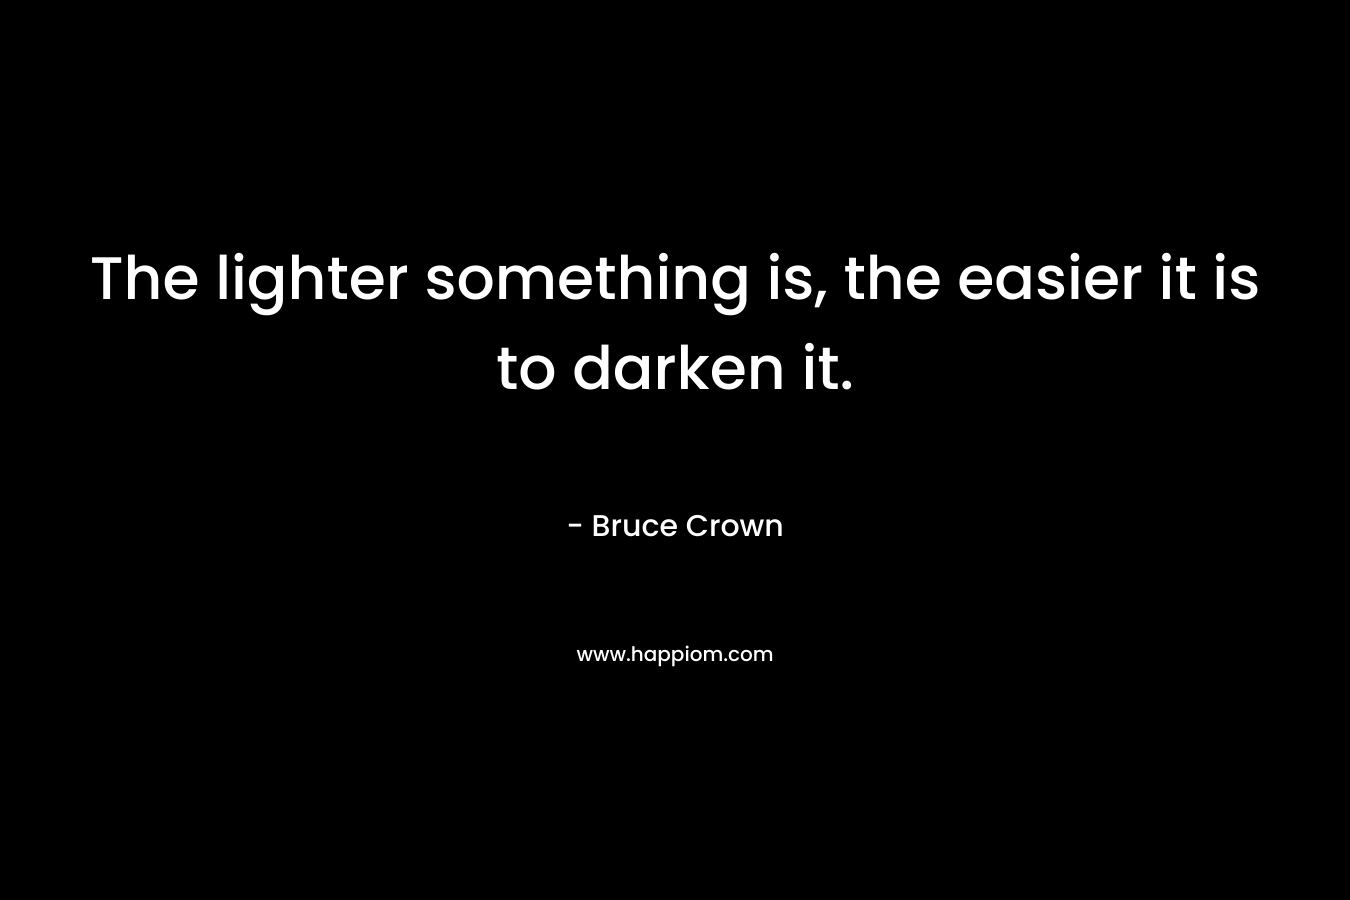 The lighter something is, the easier it is to darken it. – Bruce Crown